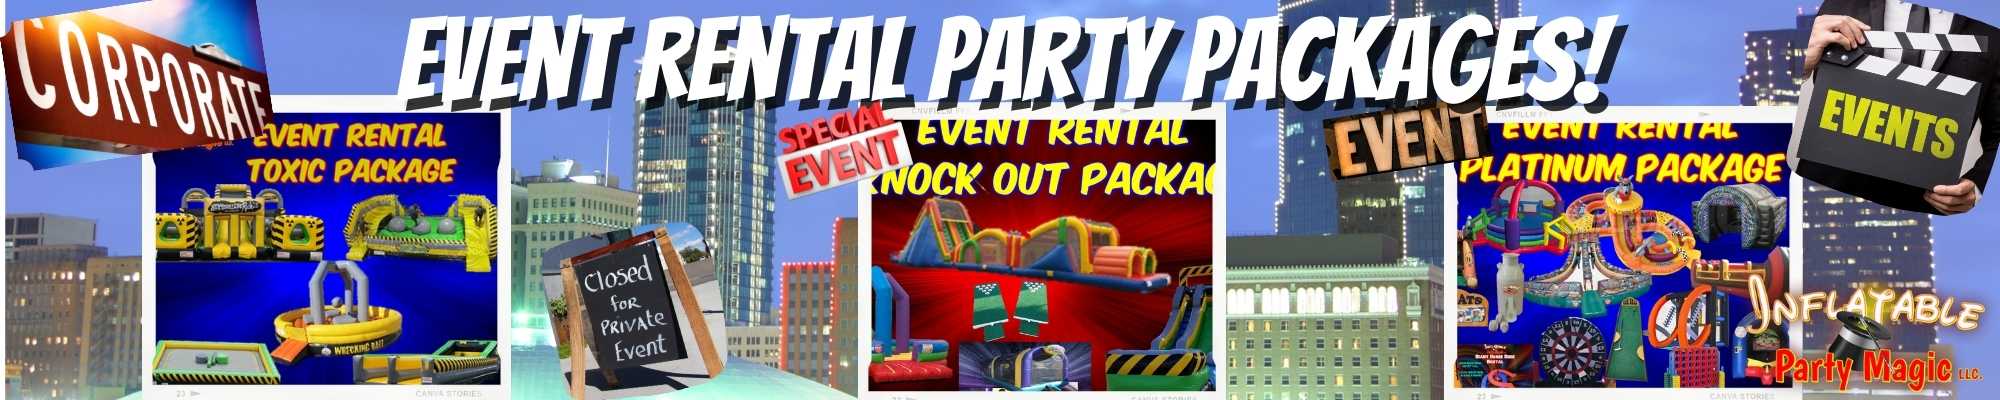 Event Rental Party Package Rentals near me